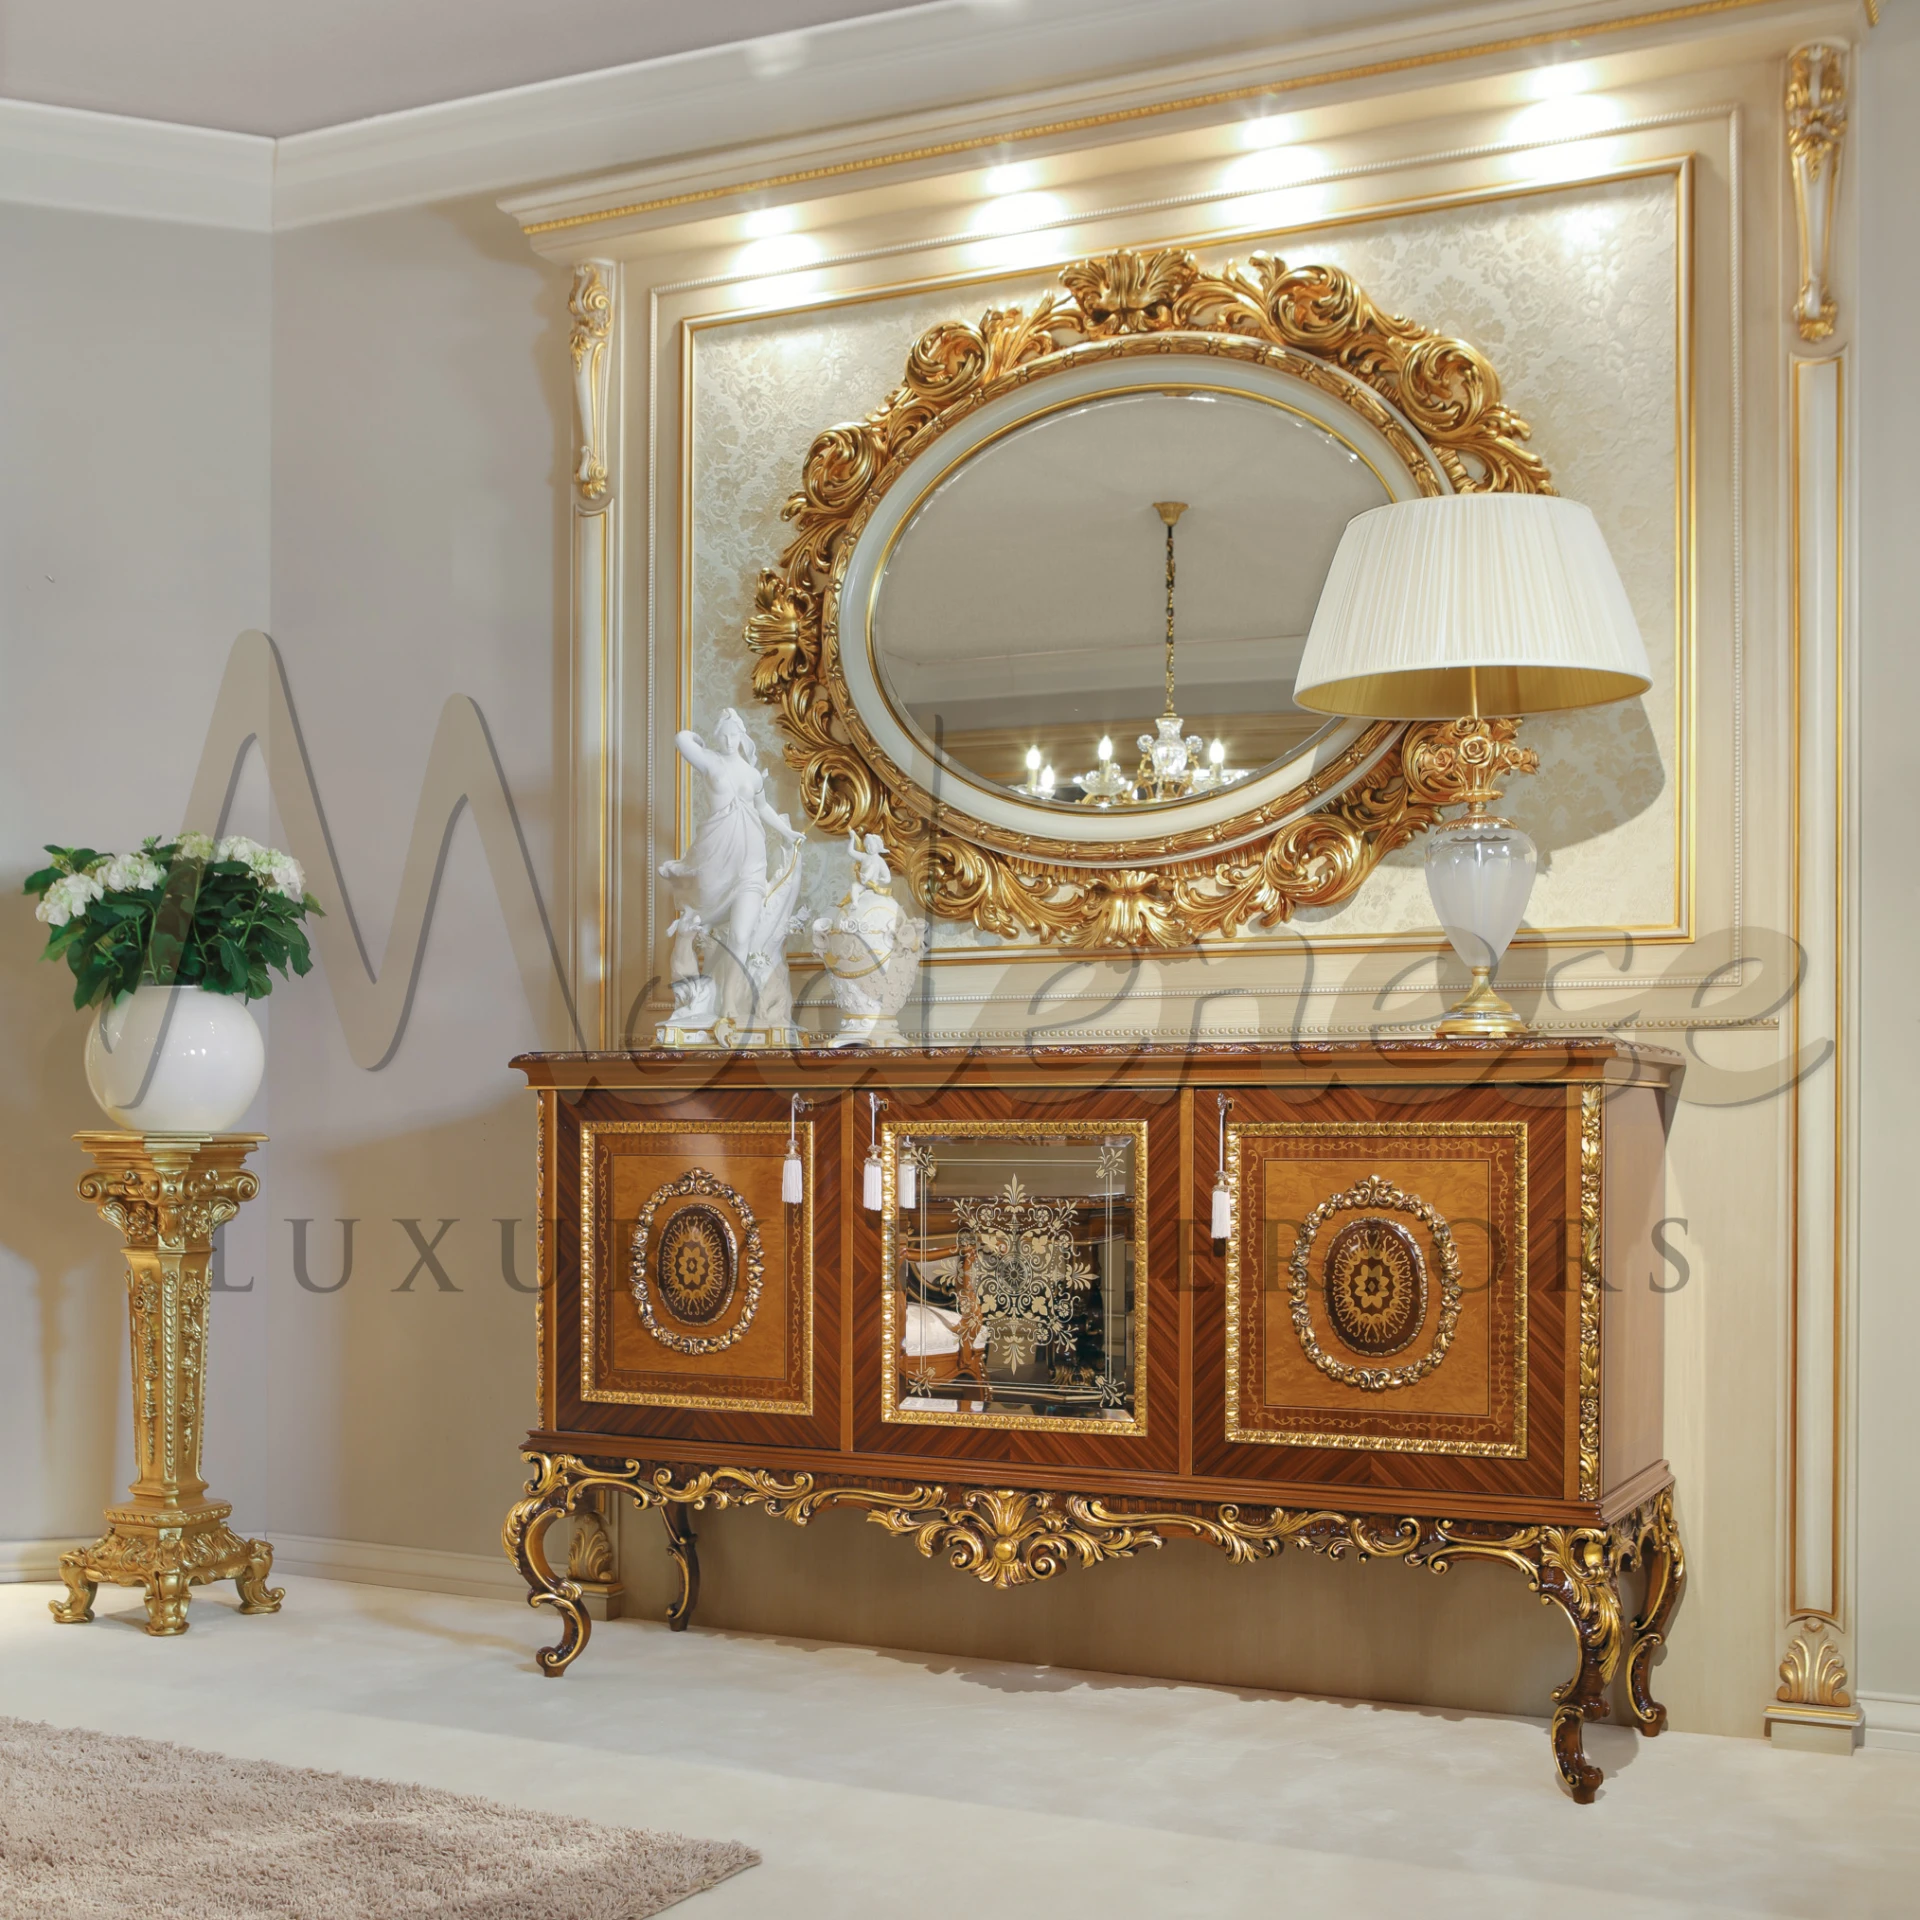 A living room displaying a golden fancy mirror above an beautifully designed wooden cabinet.